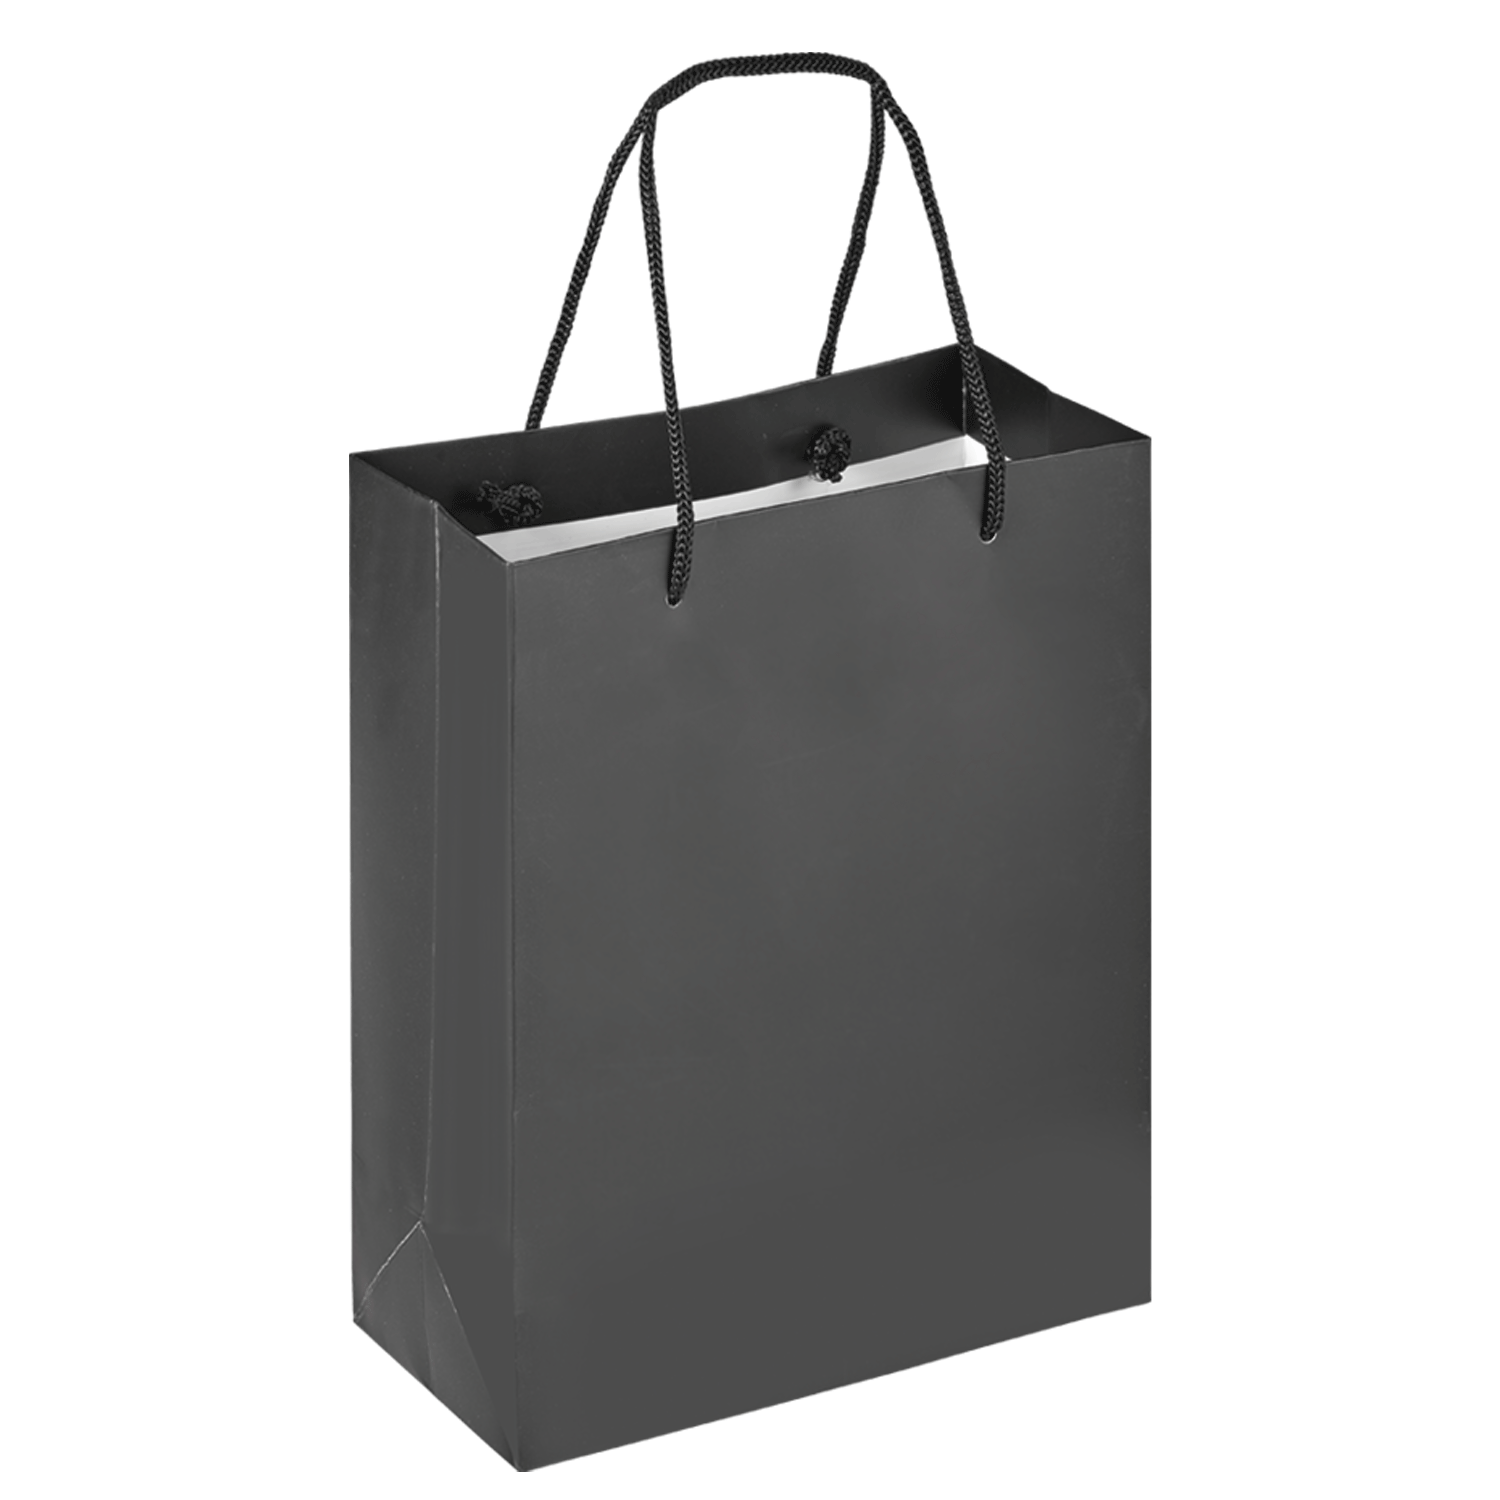 Boutique Shopping Bags - Laminated (Large) [Min. Order Qty: 100 Bags]